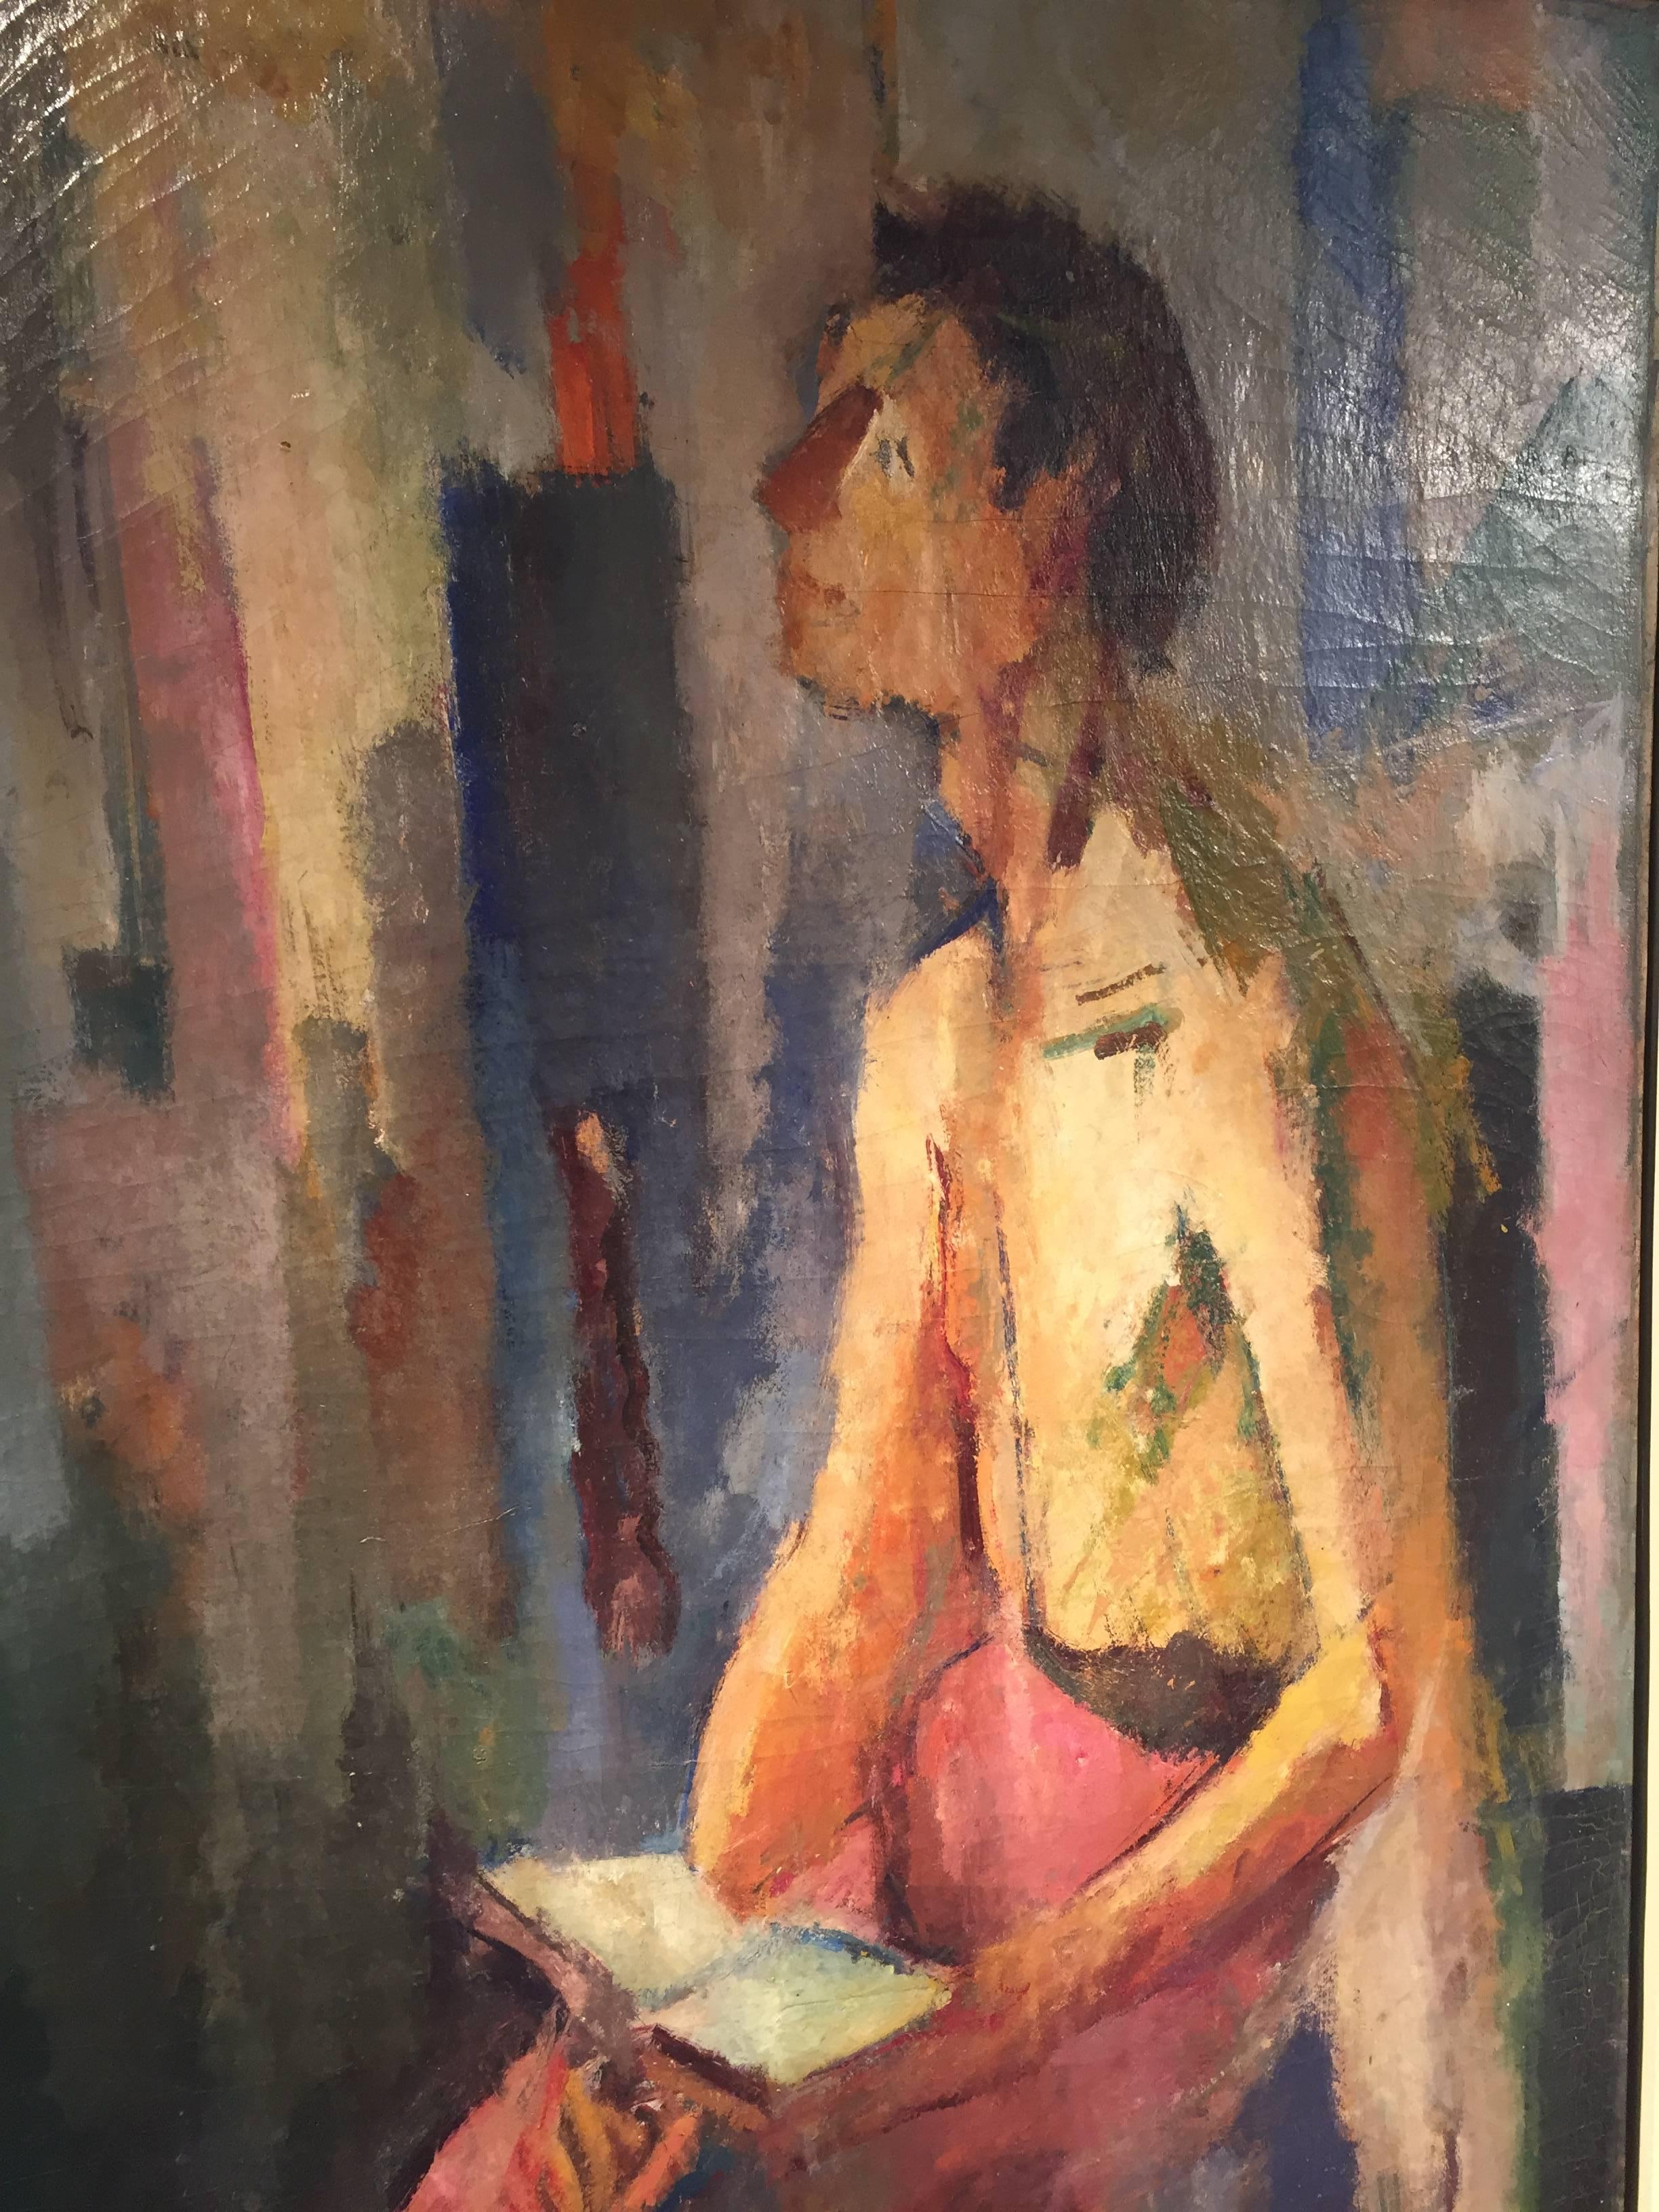 Ciro Oduber Arosemena painting title "Seated Man," dated 1950.
Panama, Born 1921-d 2000 oil on canvas.
Exhibited Museum of Contemporary Art Panama 6/15/92.
with original Inventory Number and price tag $9500.